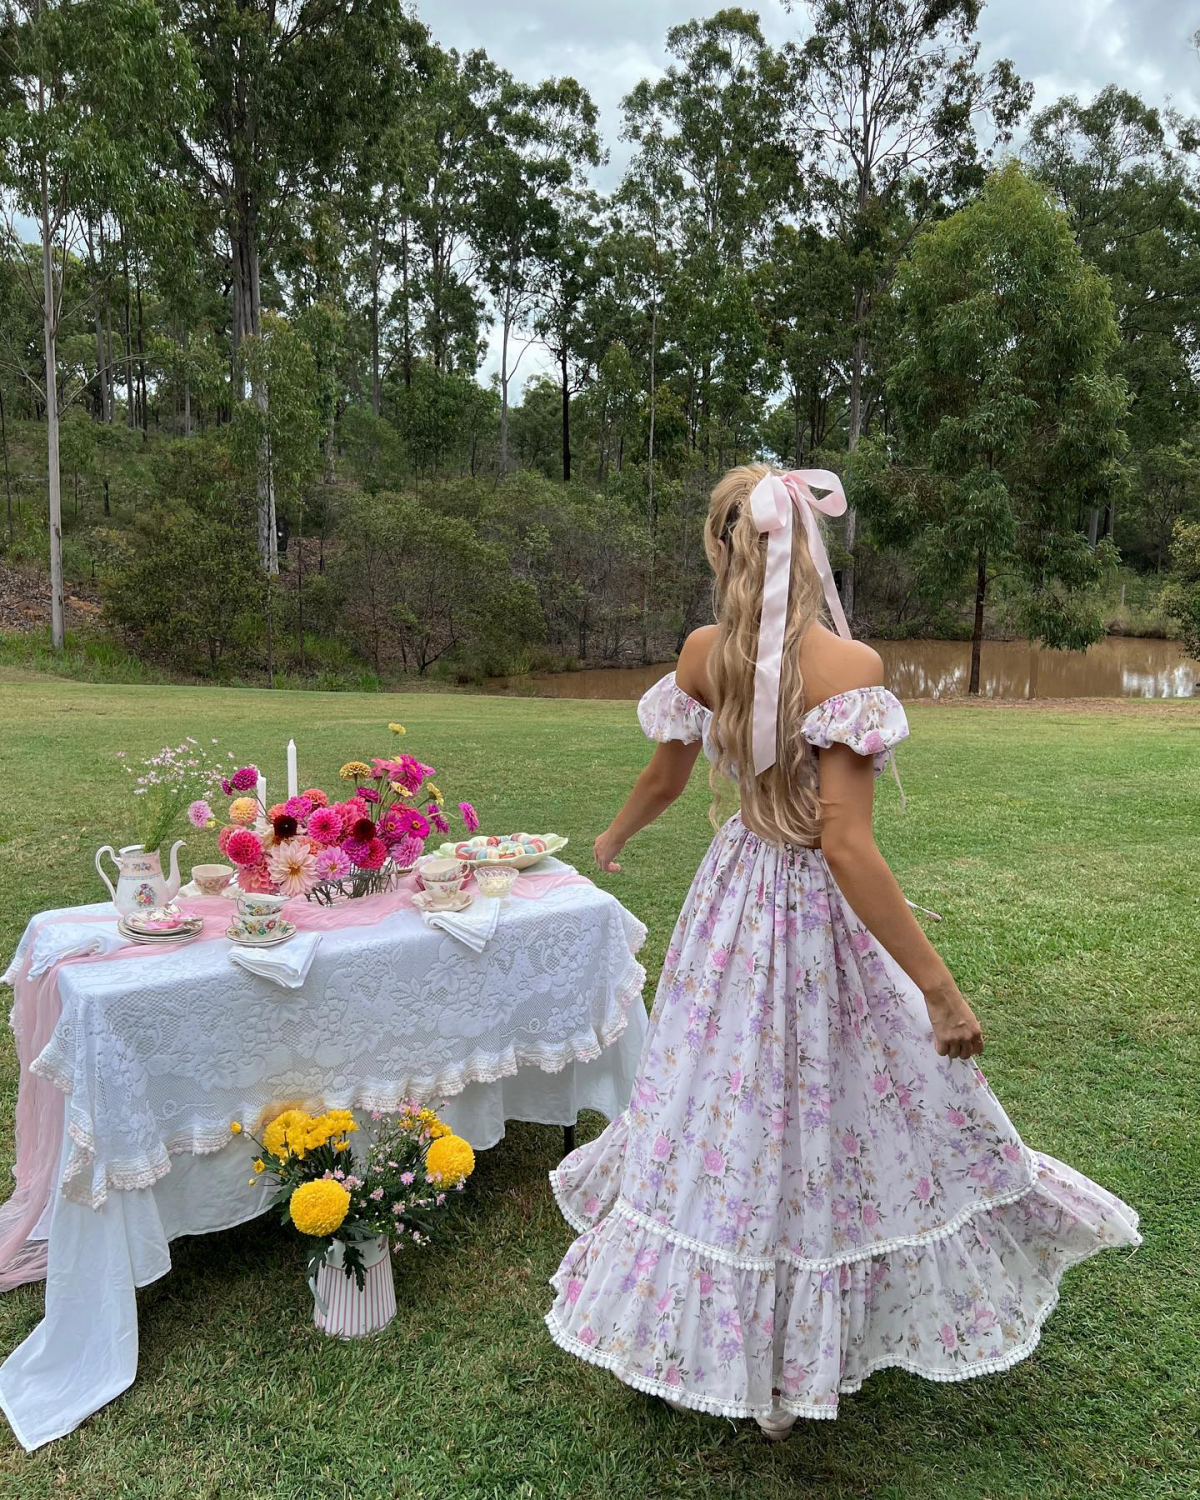 woman at a tea party with floral dress